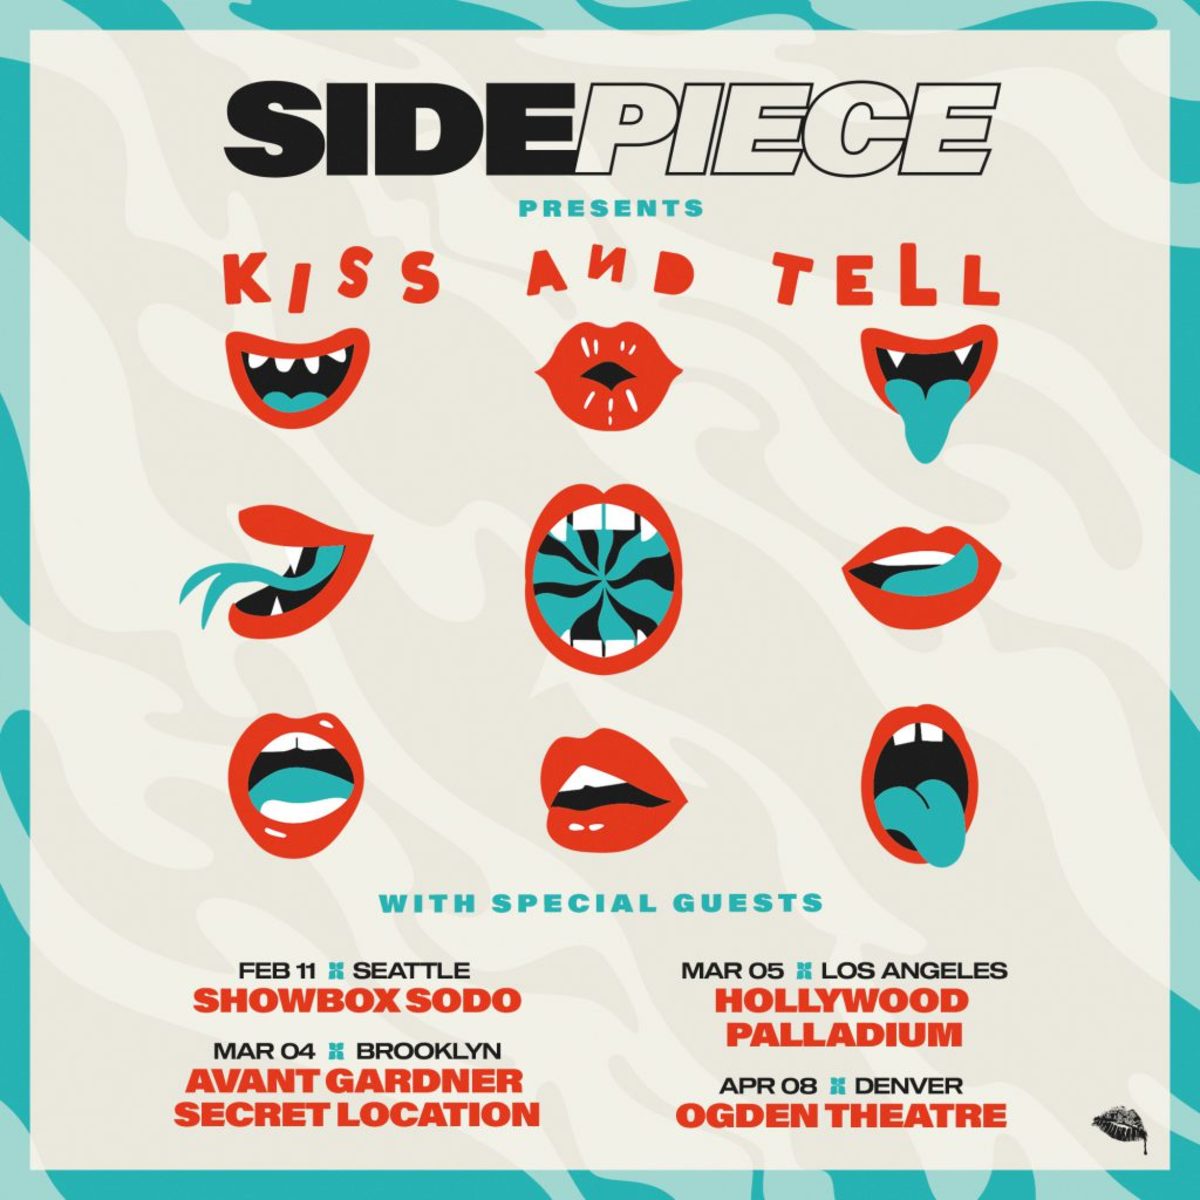 SIDPIECE's 2022 "Kiss and Tell" tour.